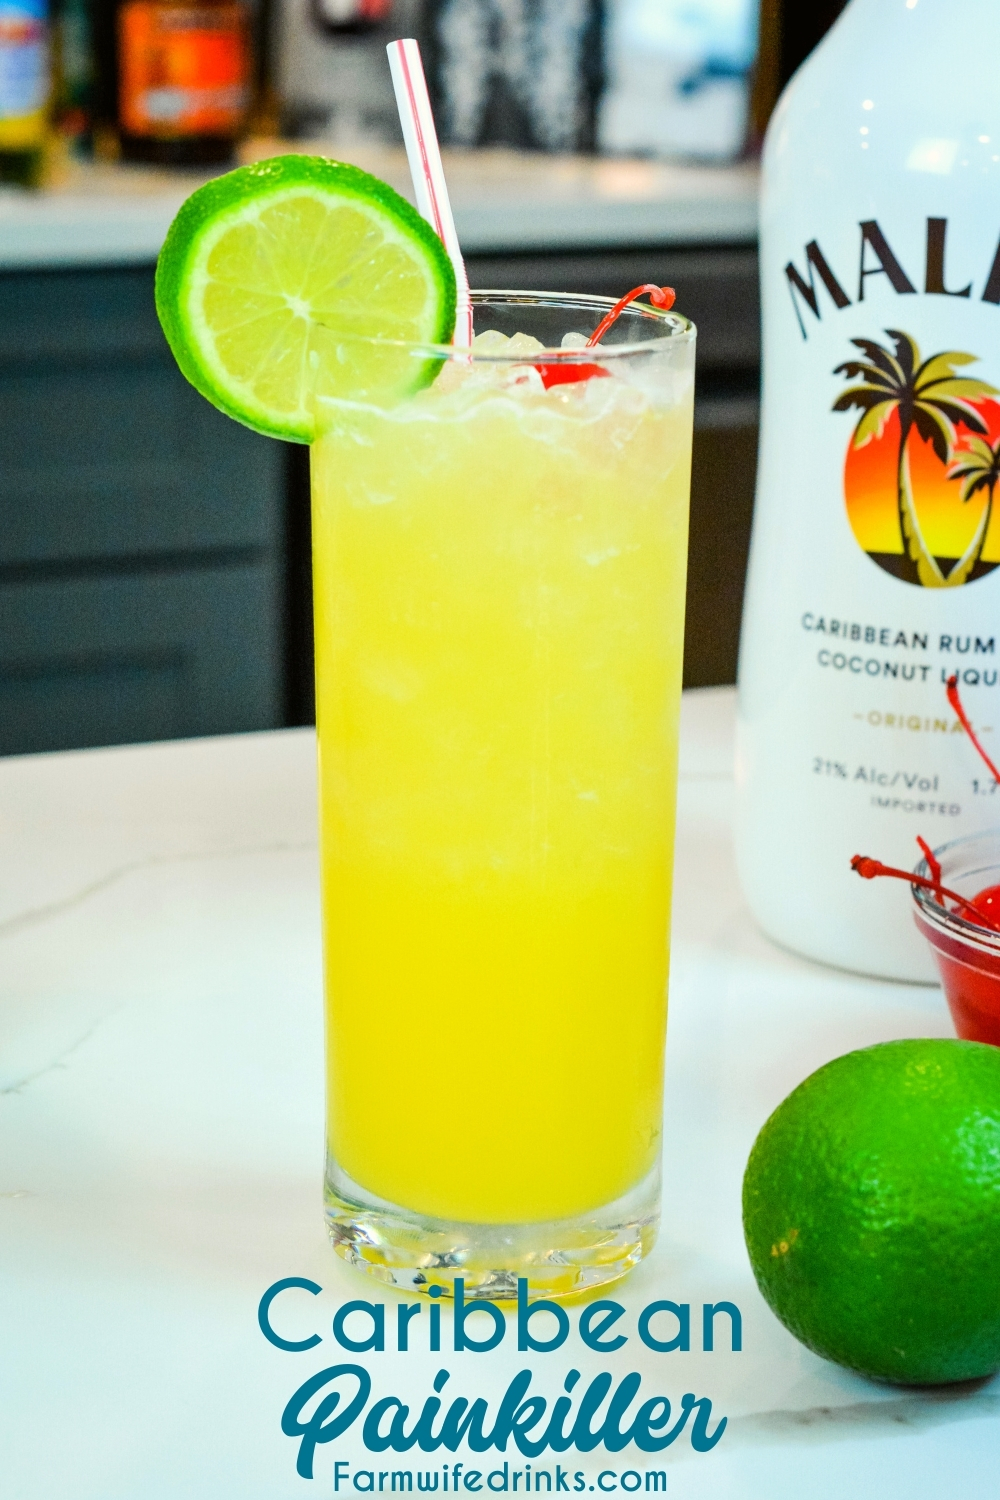 The Caribbean painkiller combines coconut rum and vodka with orange, lime, and pineapple juices for the cocktail that will make you feel like you are sitting on the beach down in the islands.